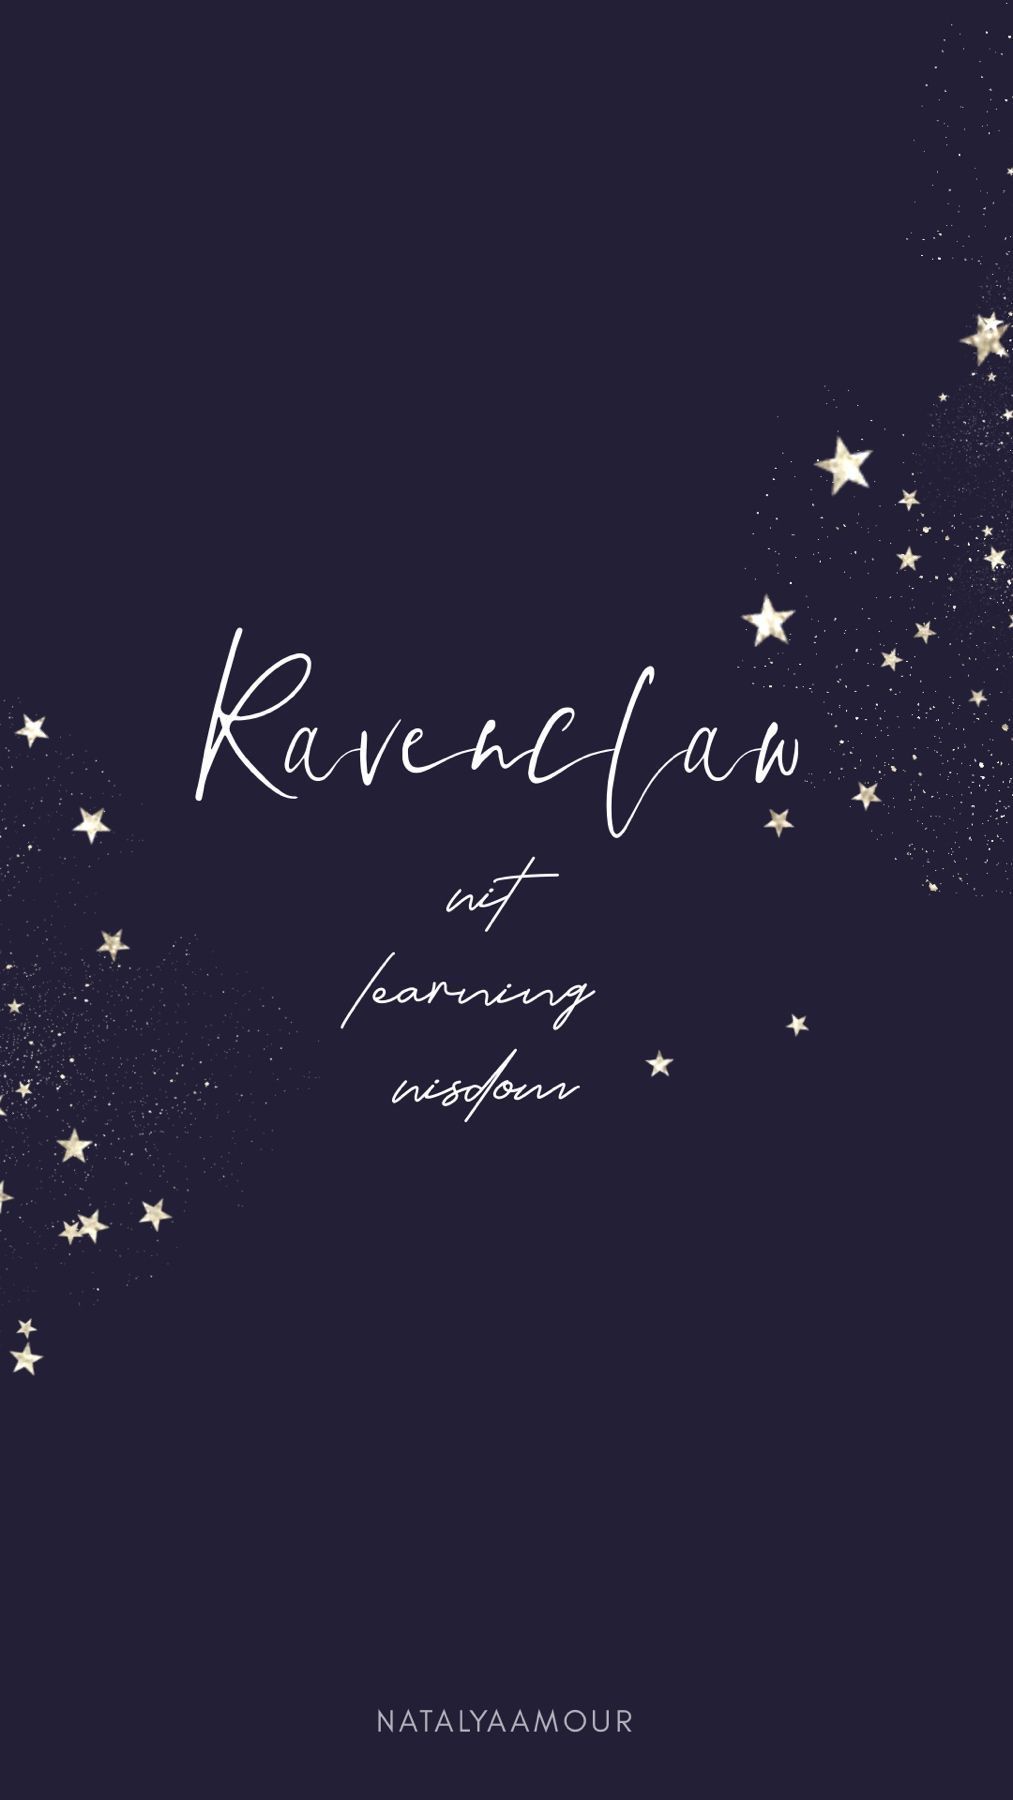 Ravenclaw  Phone Wallpaper by request from uDKSpaceHero  rharrypotter